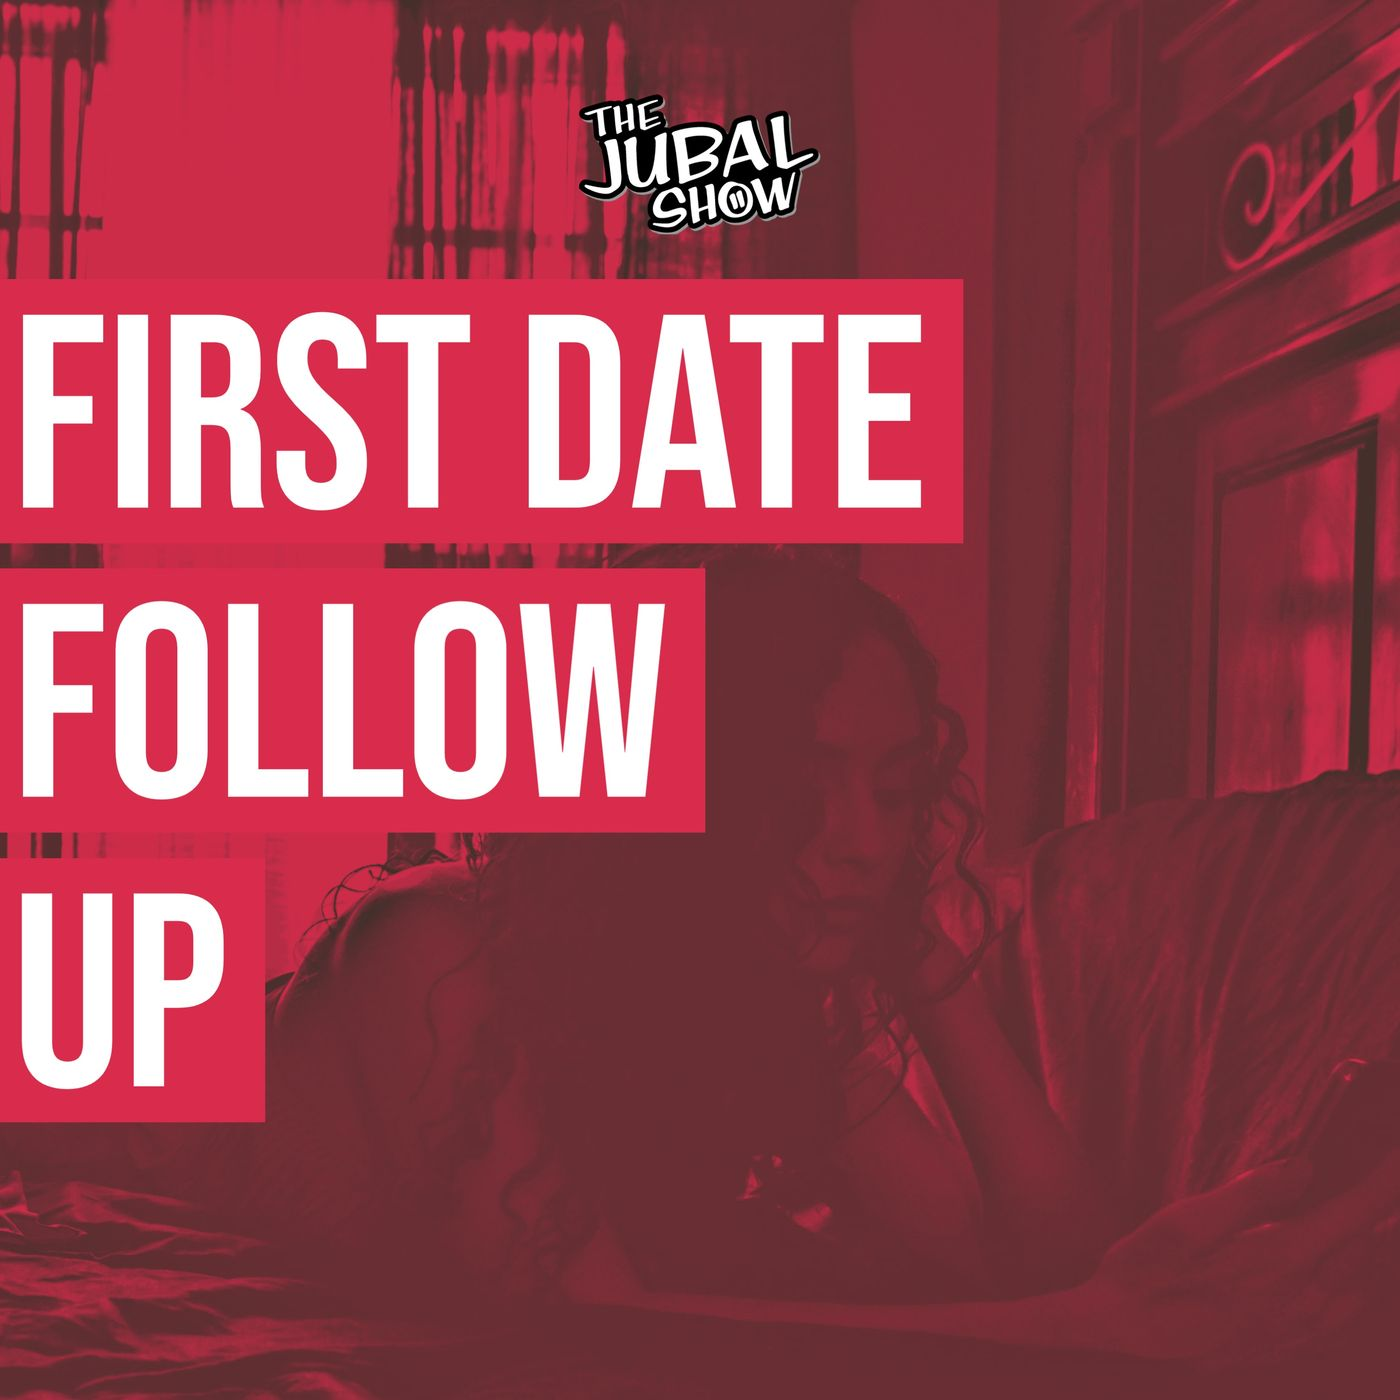 This First Date Follow Up might make you cry!